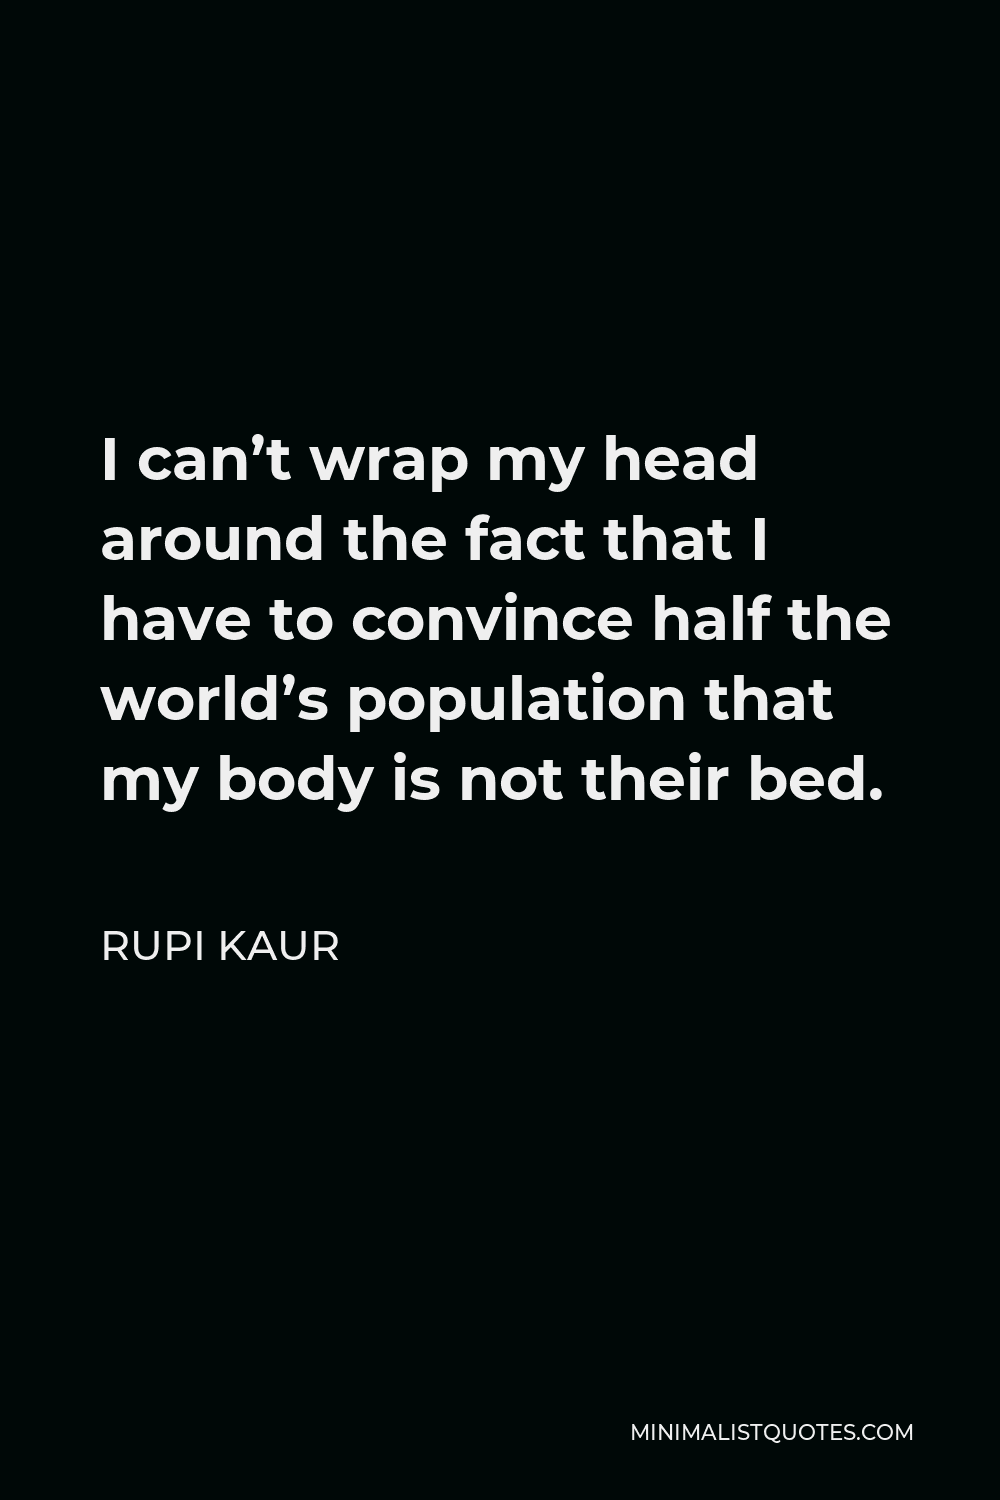 Rupi Kaur Quote - I can’t wrap my head around the fact that I have to convince half the world’s population that my body is not their bed.